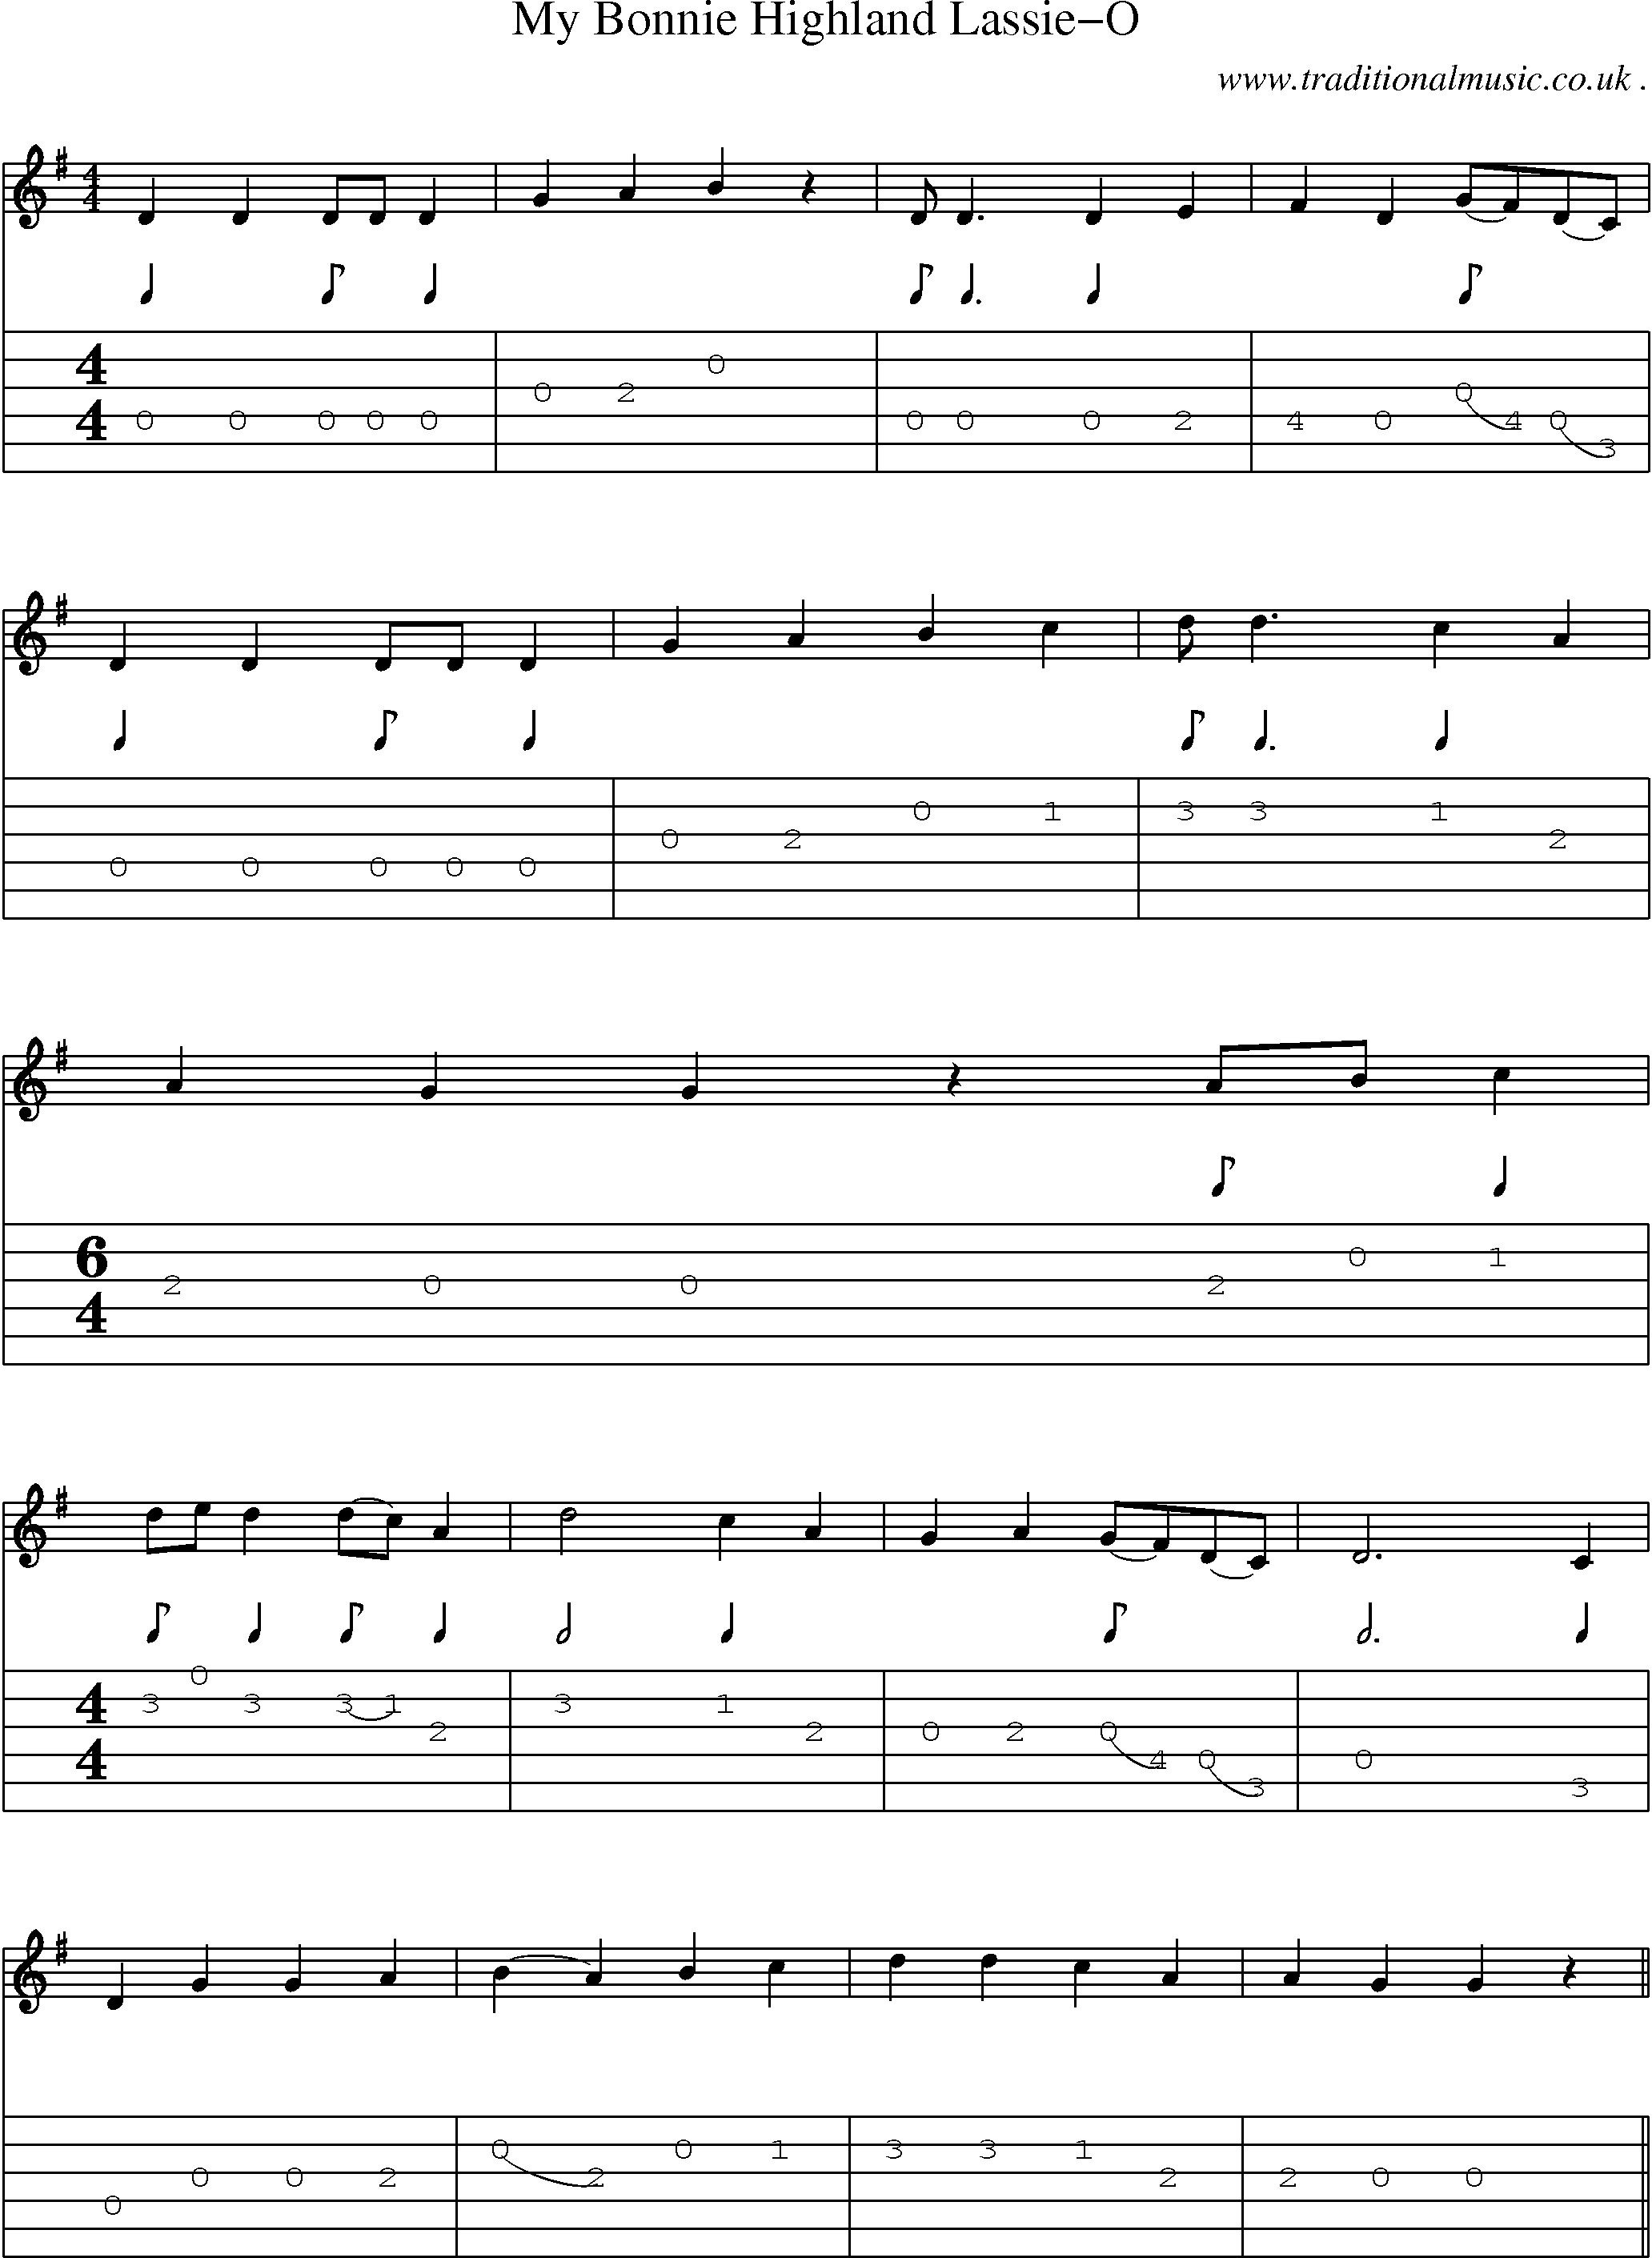 Sheet-Music and Guitar Tabs for My Bonnie Highland Lassie-o